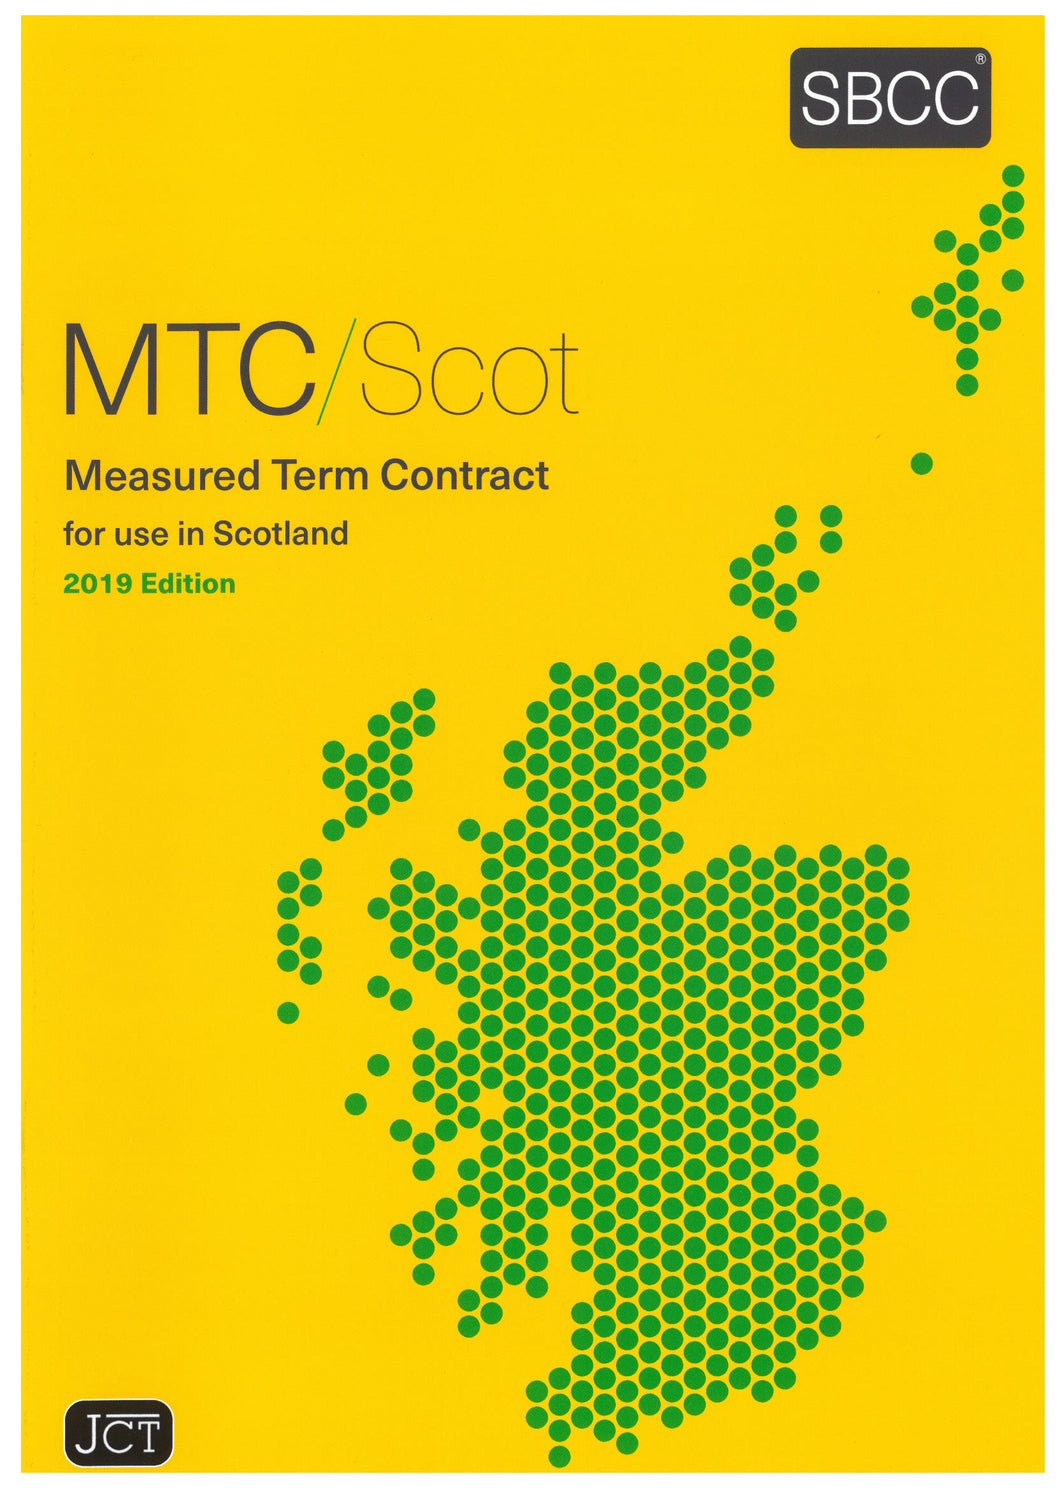 Measured Term Contract for use in Scotland 2019